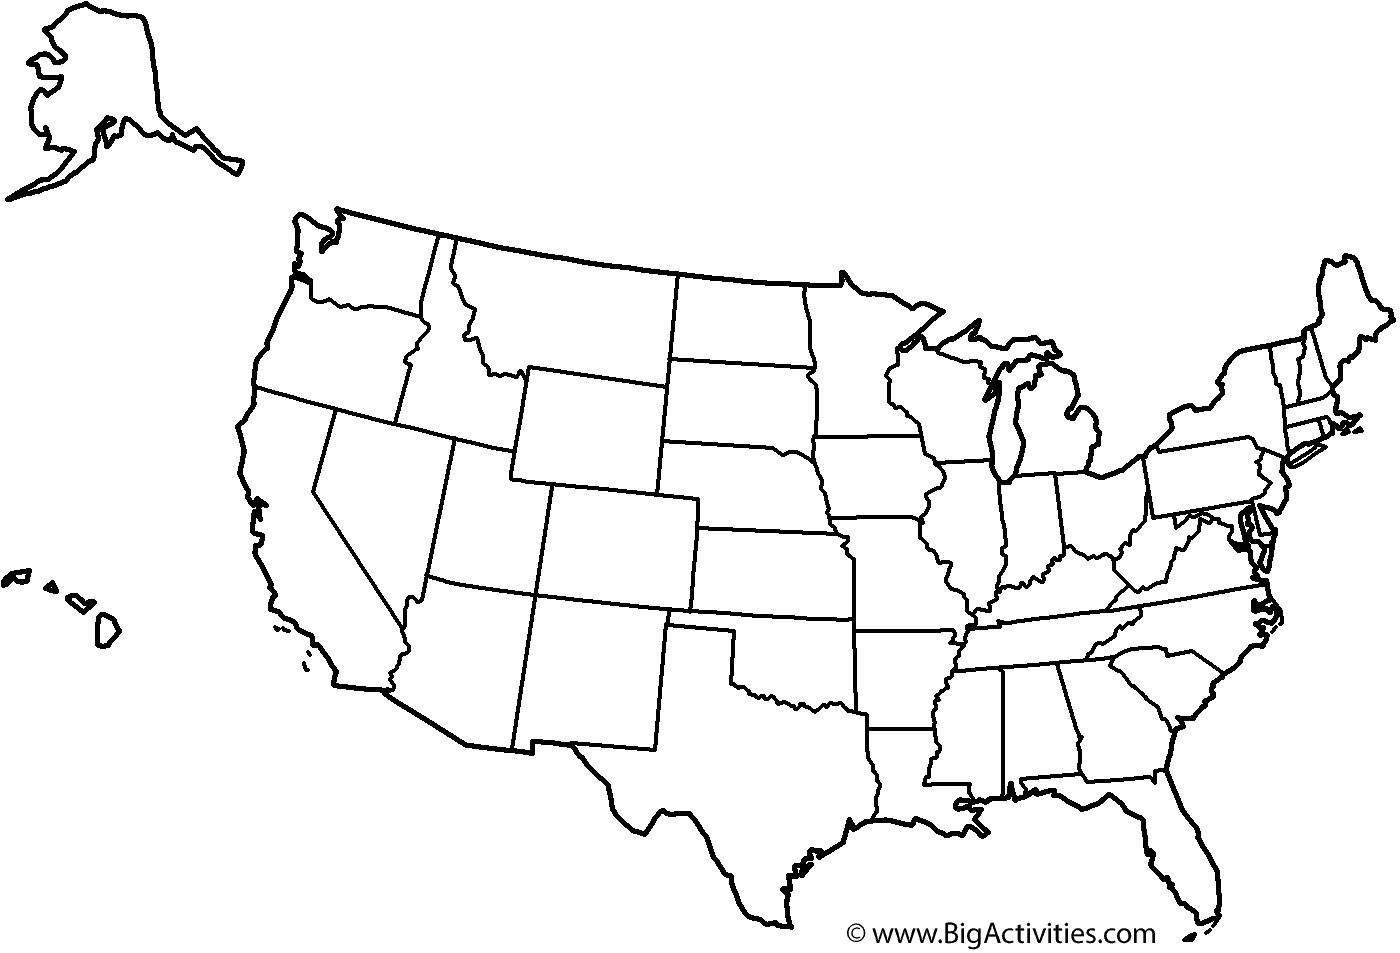 United States Map Coloring Pages
 Map of the United States with title and states Coloring